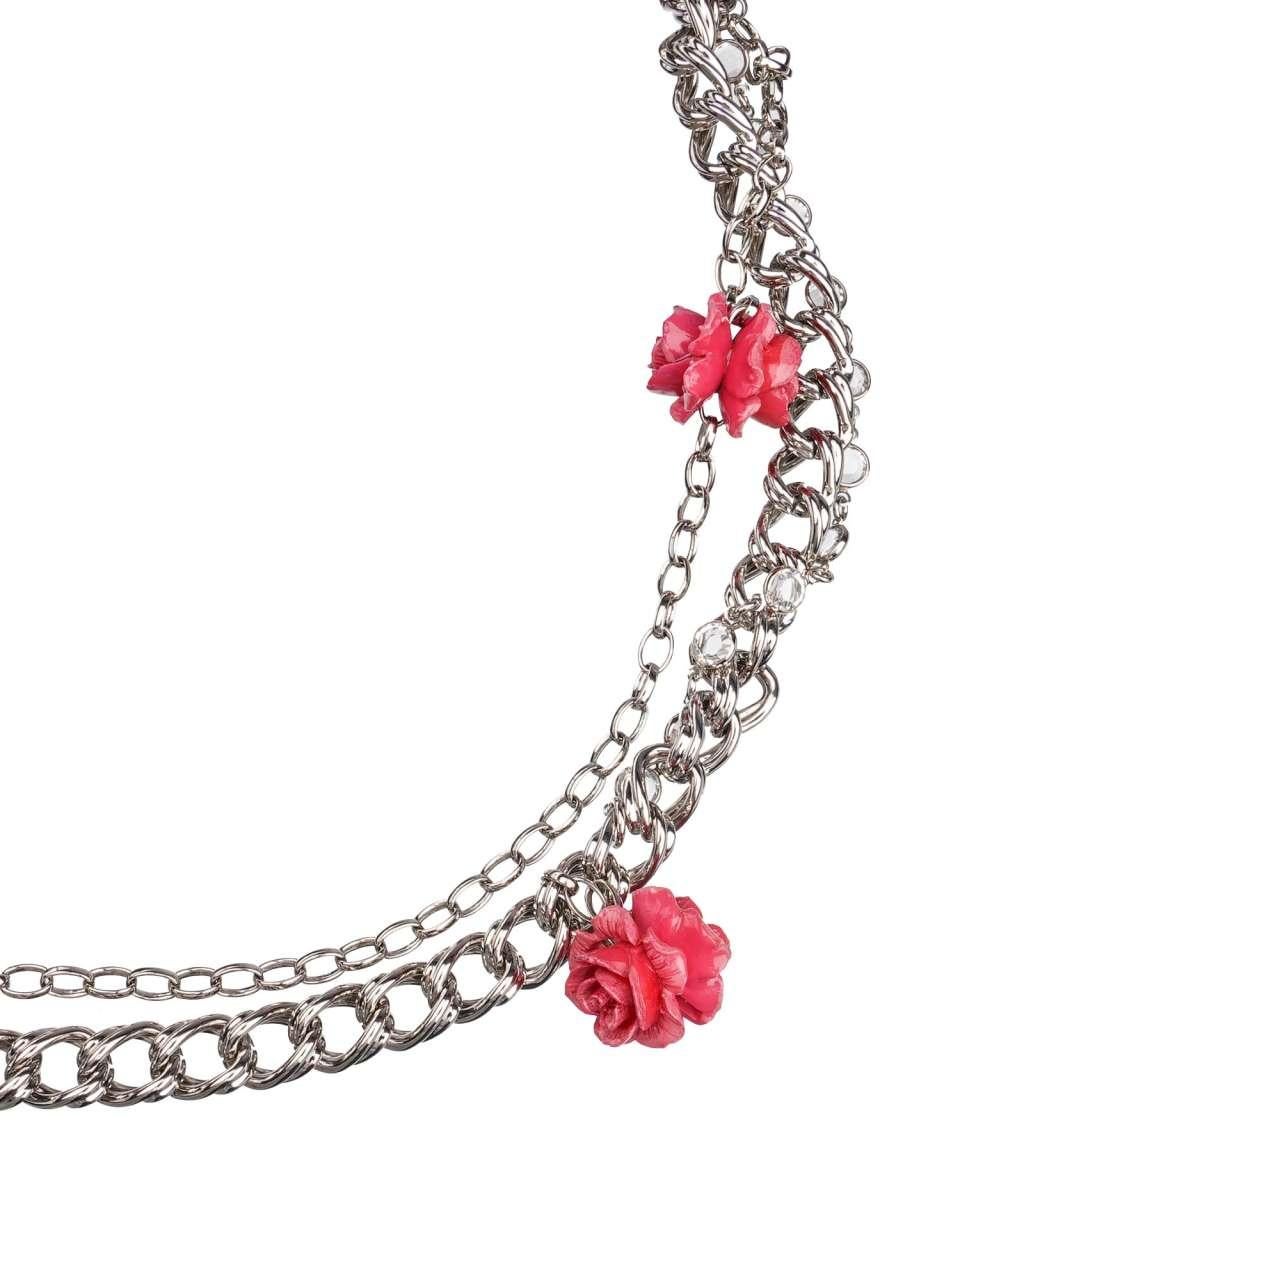 D&G Rose Roses Crystal Lizzard Structure Leather Chain Belt Pink Silver M In Excellent Condition For Sale In Erkrath, DE